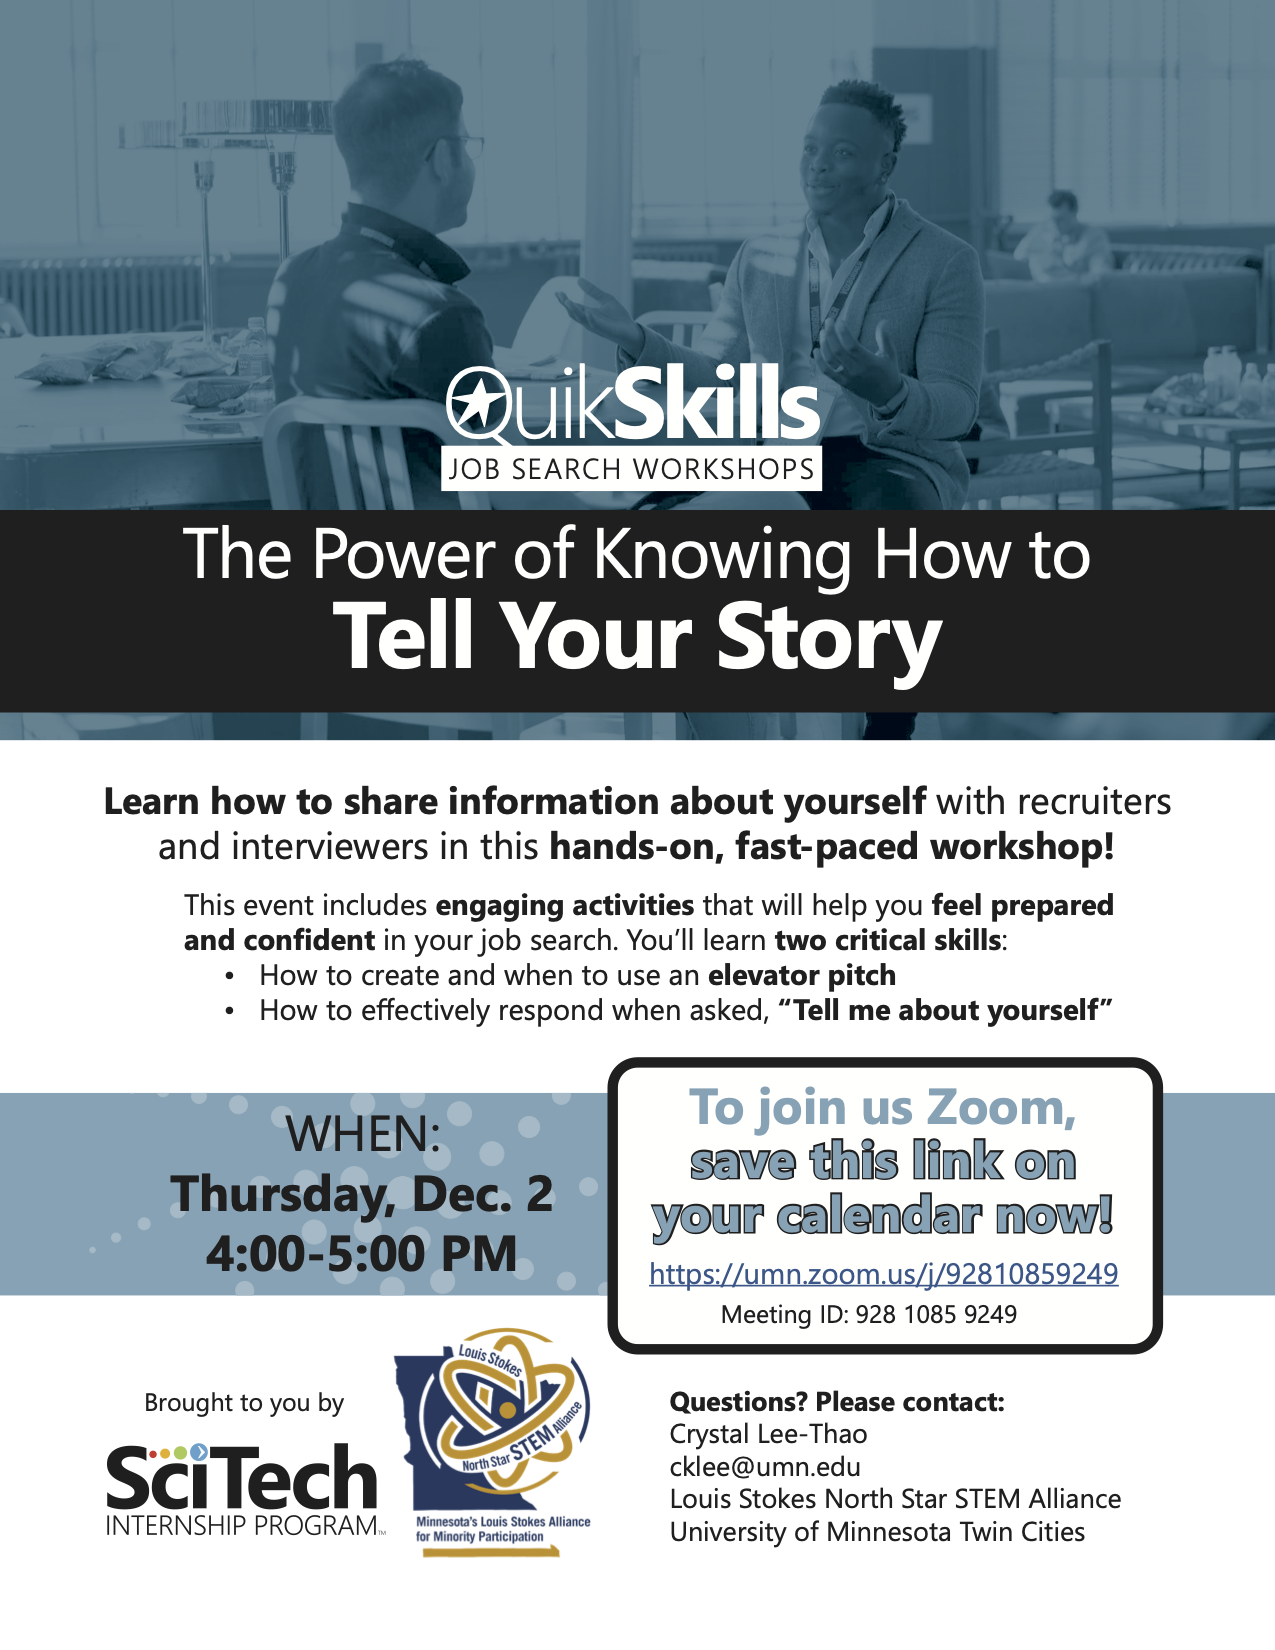 This event includes engaging activities that will help you feel prepared and confident in your job search. You'll learn two skills: (1) How to create and when to use an elevator pitch and (2) How to effectively respond when asked, "Tell me about yourself."